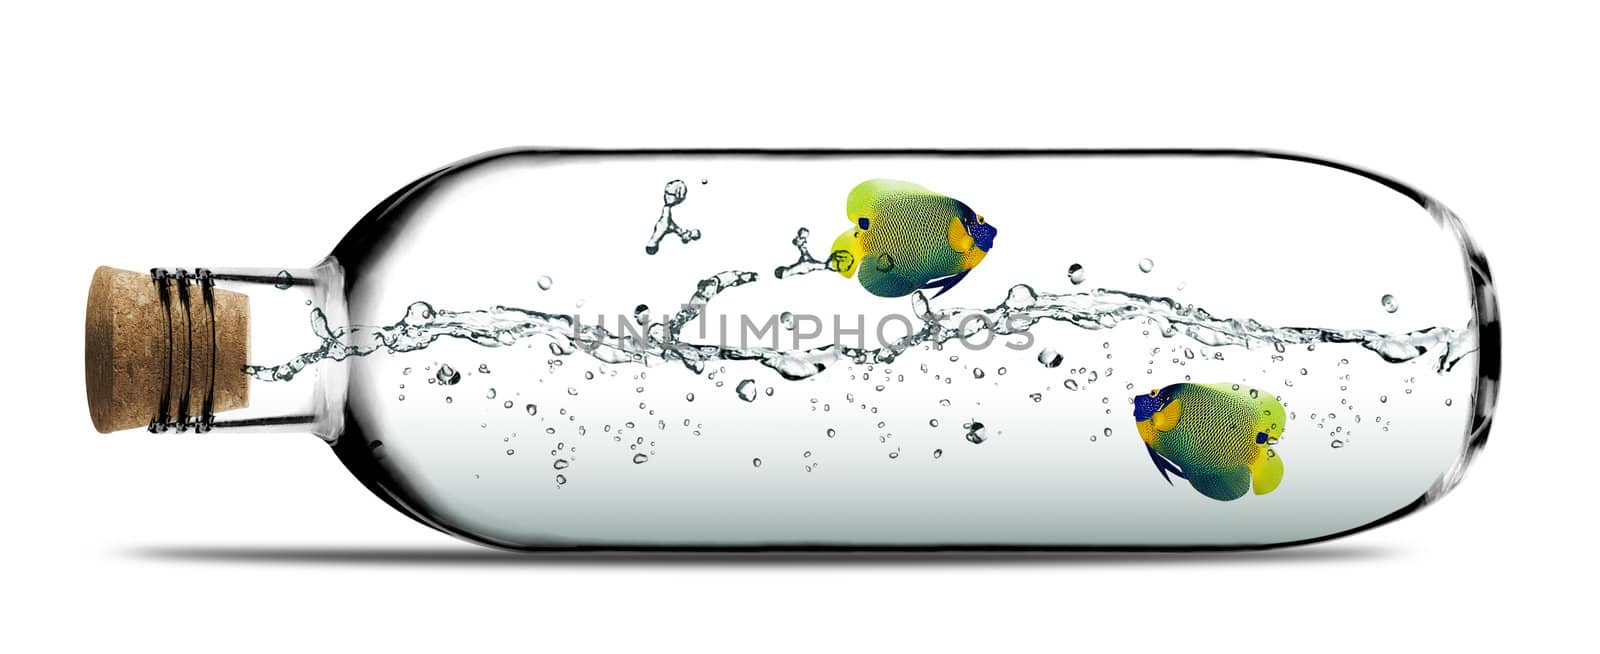 Two angelfish and water splashes inside Glass bottle with cork.